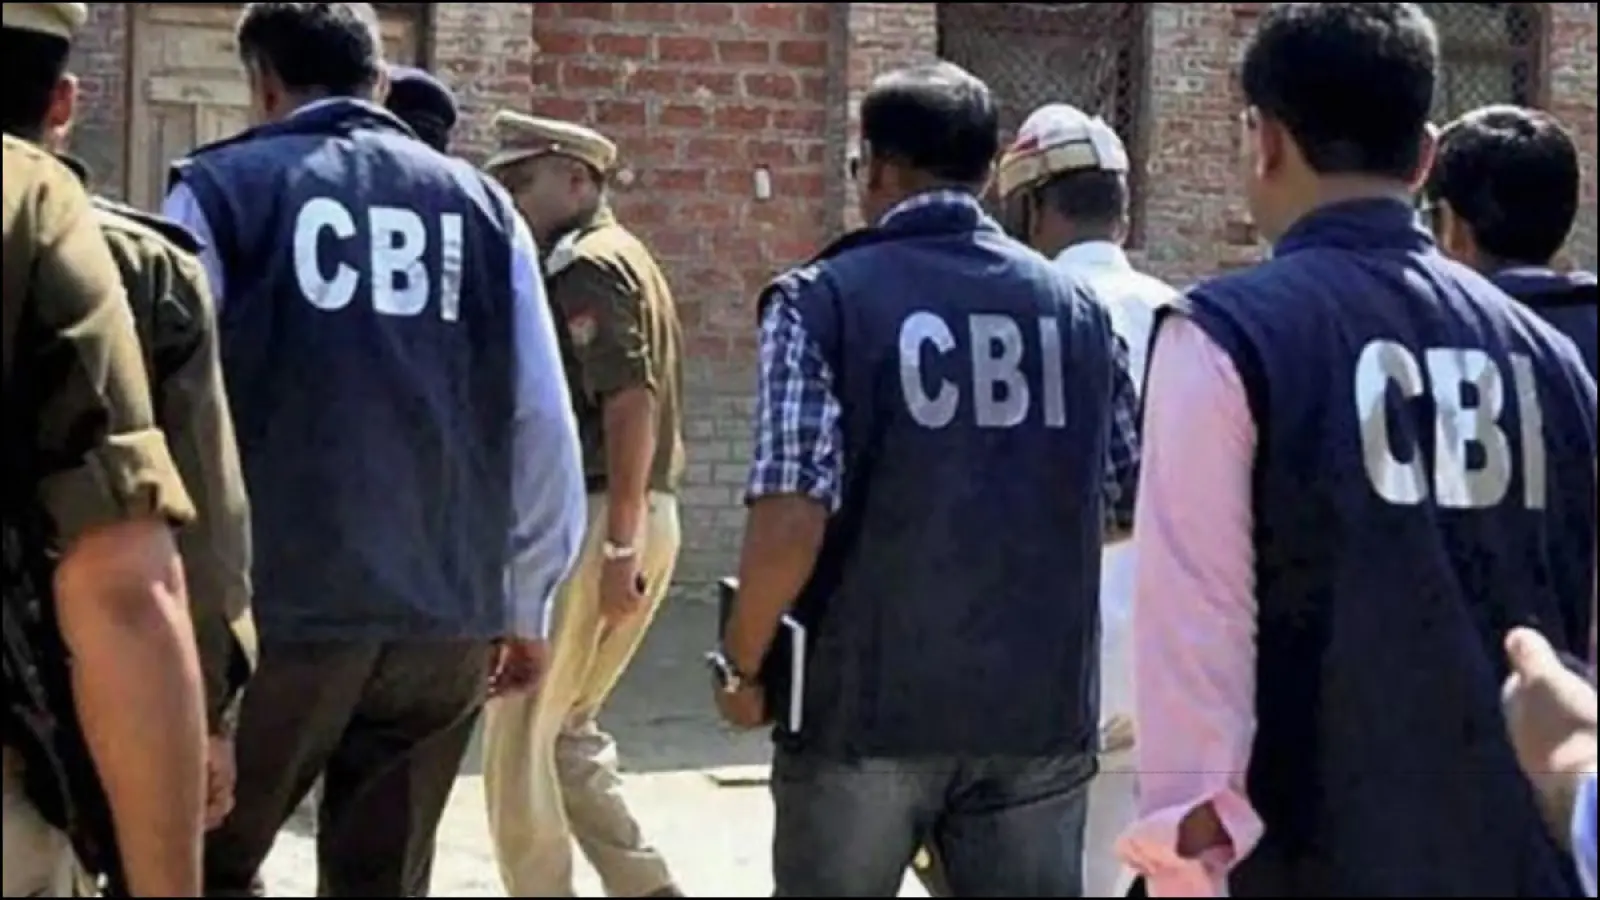 CBI raids the hideouts of TMC leaders in Bengal, case related to post-poll violence